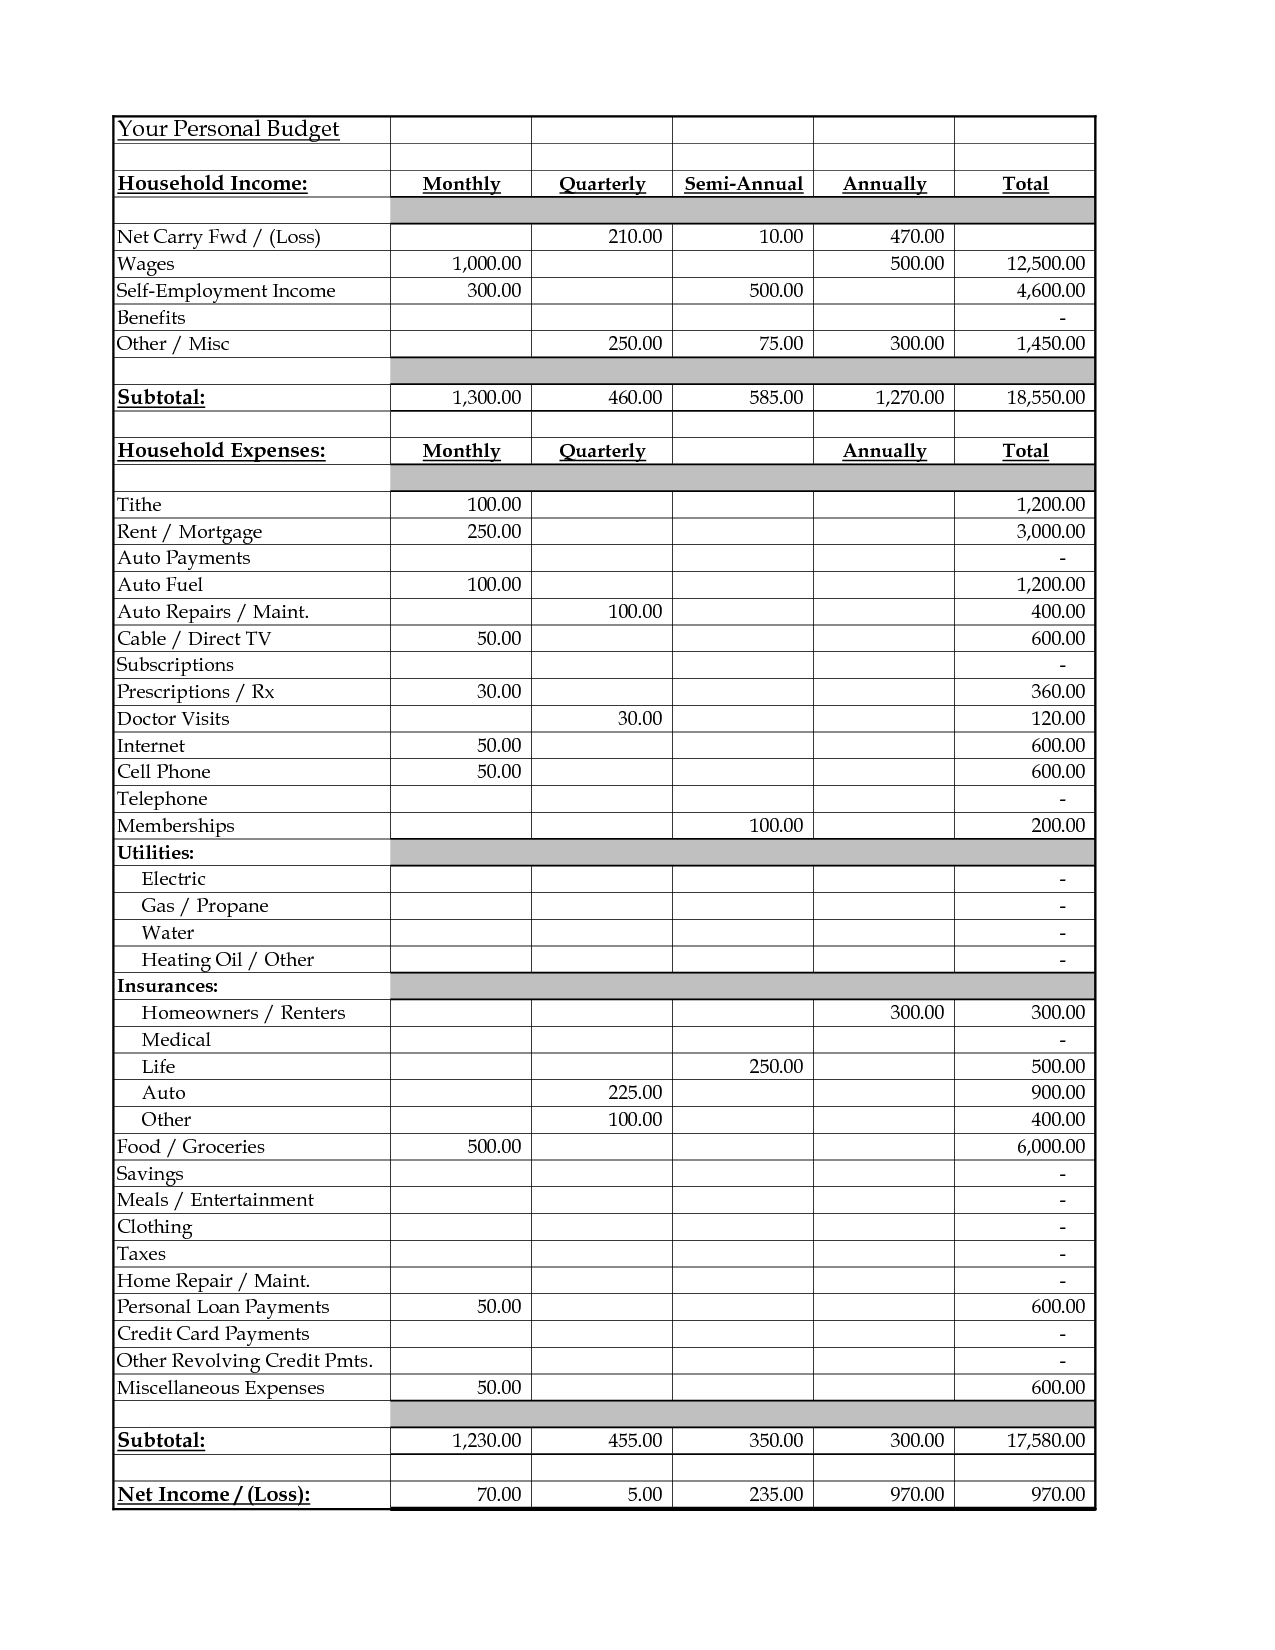 Department Budget Template Sample Personal Budget Template Mhzqby and ...